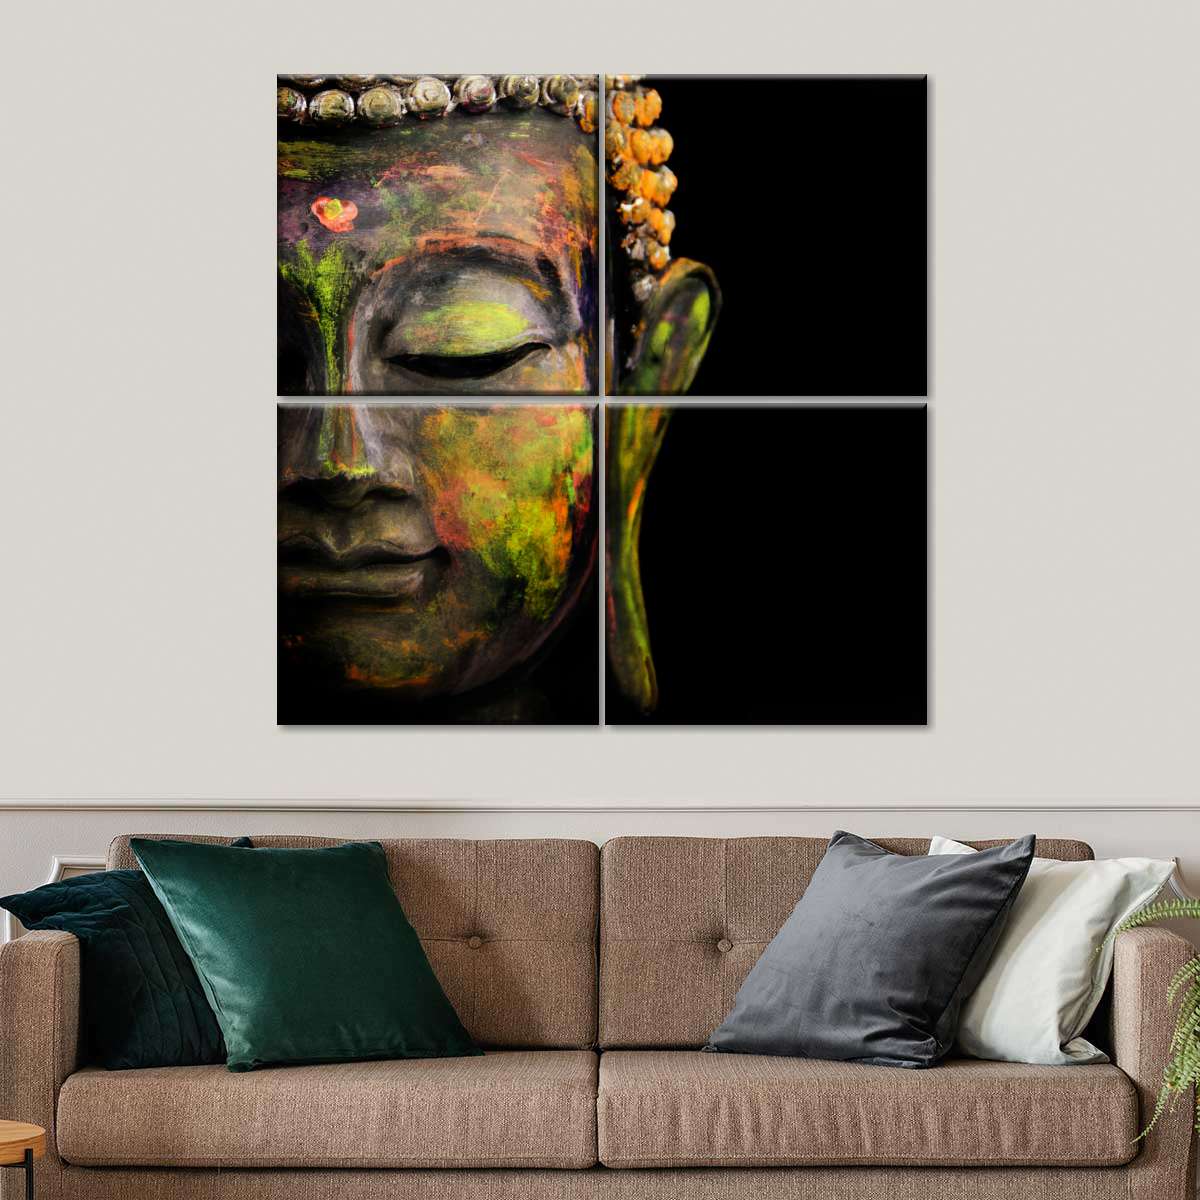 Buy The South Square Canvas Wall Art Print